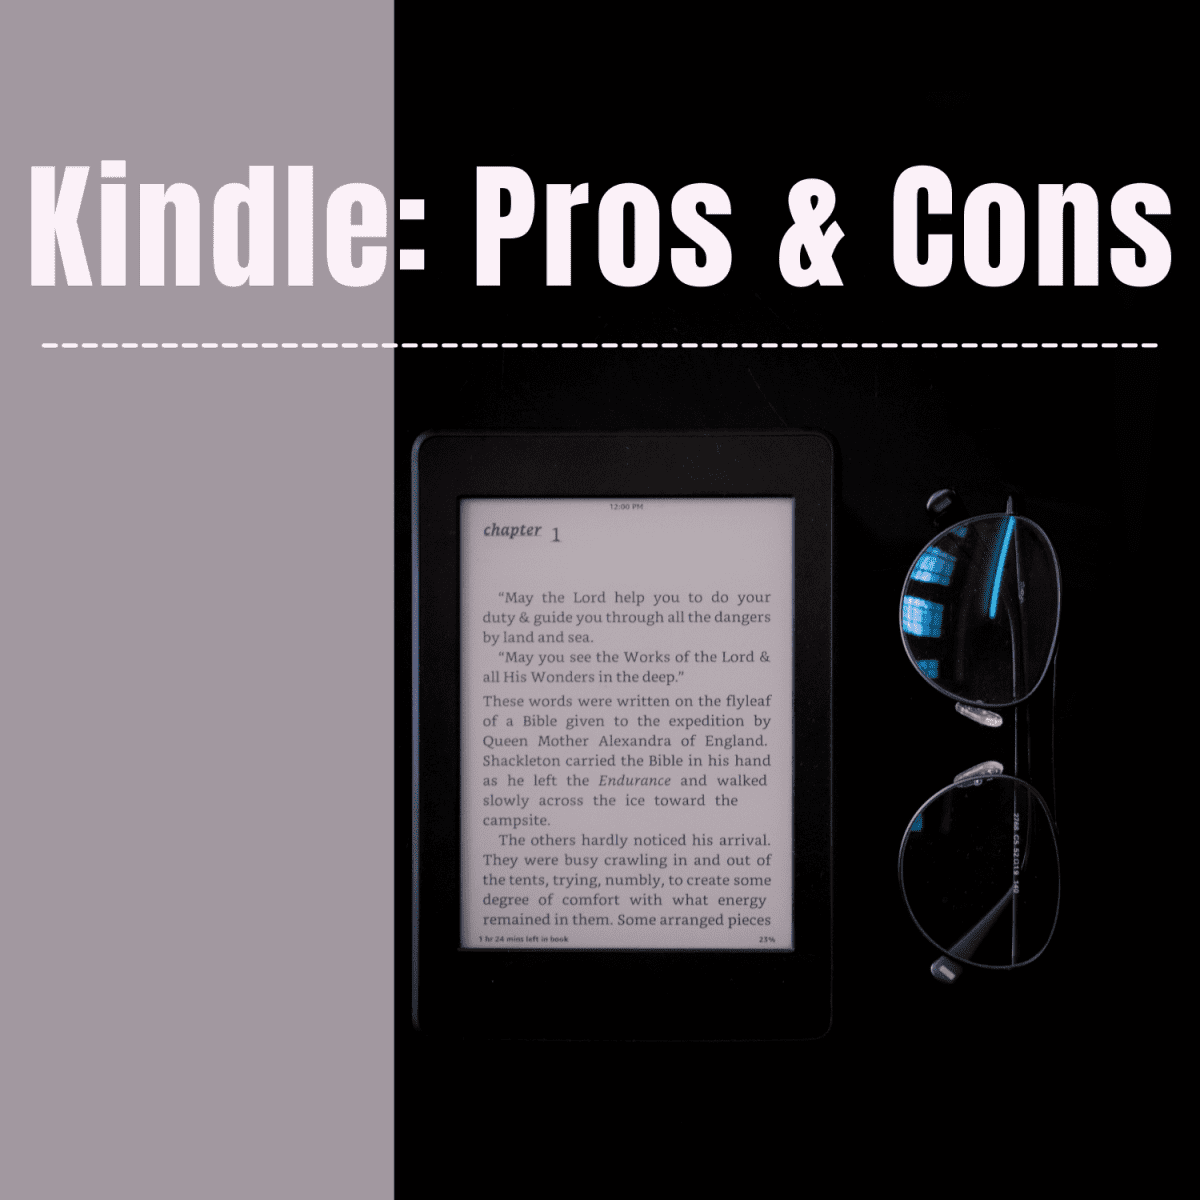 Advantages and Disadvantages of a Kindle: Advice From a Bookworm -  TurboFuture